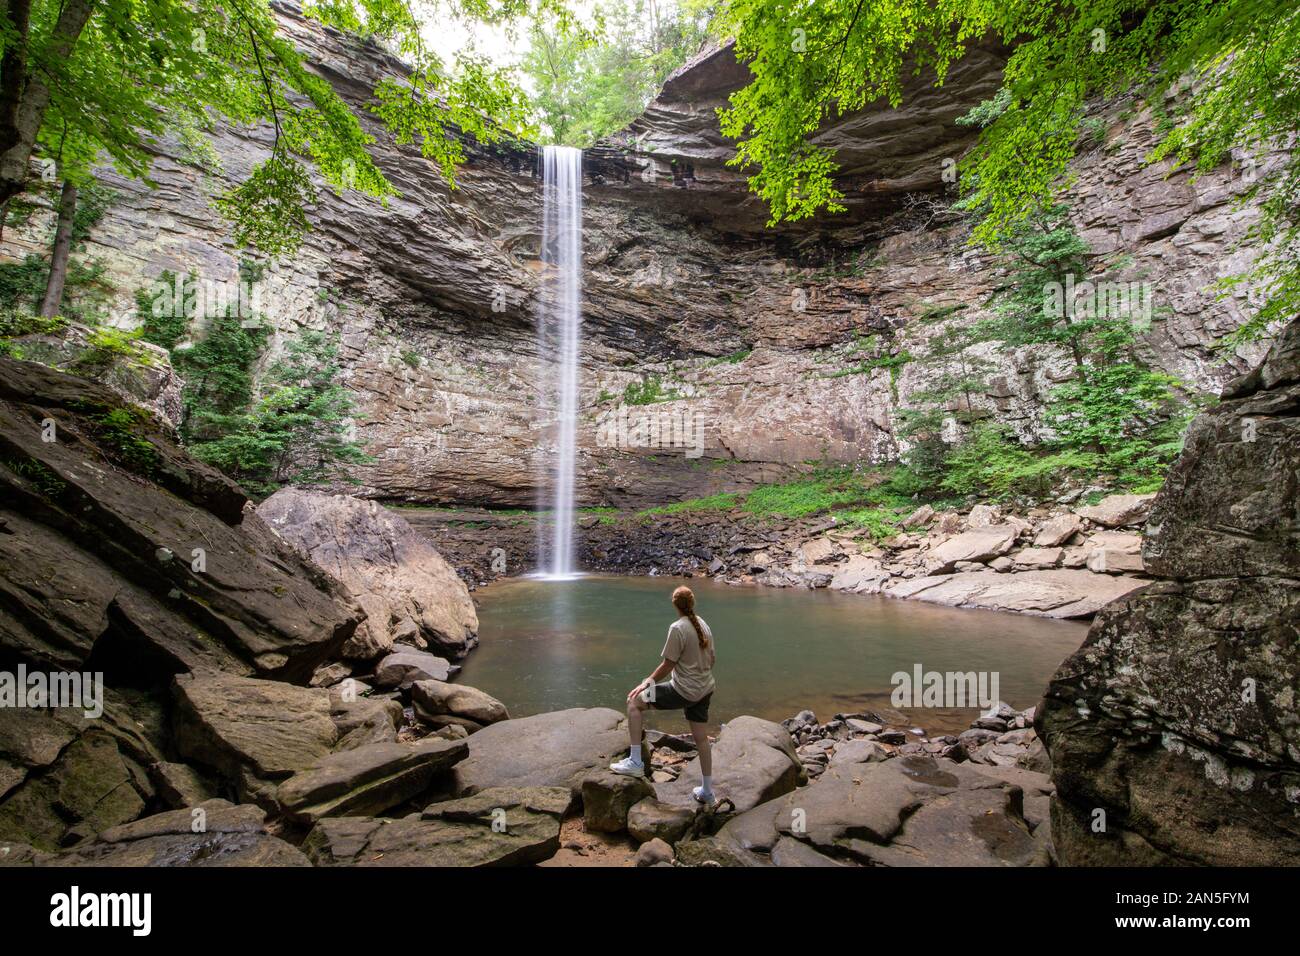 Woman standing and admiring the majestic Ozone Falls in Crossville, Tennessee which plunges 110 feet over a sandstone rock into a deep pool. Stock Photo